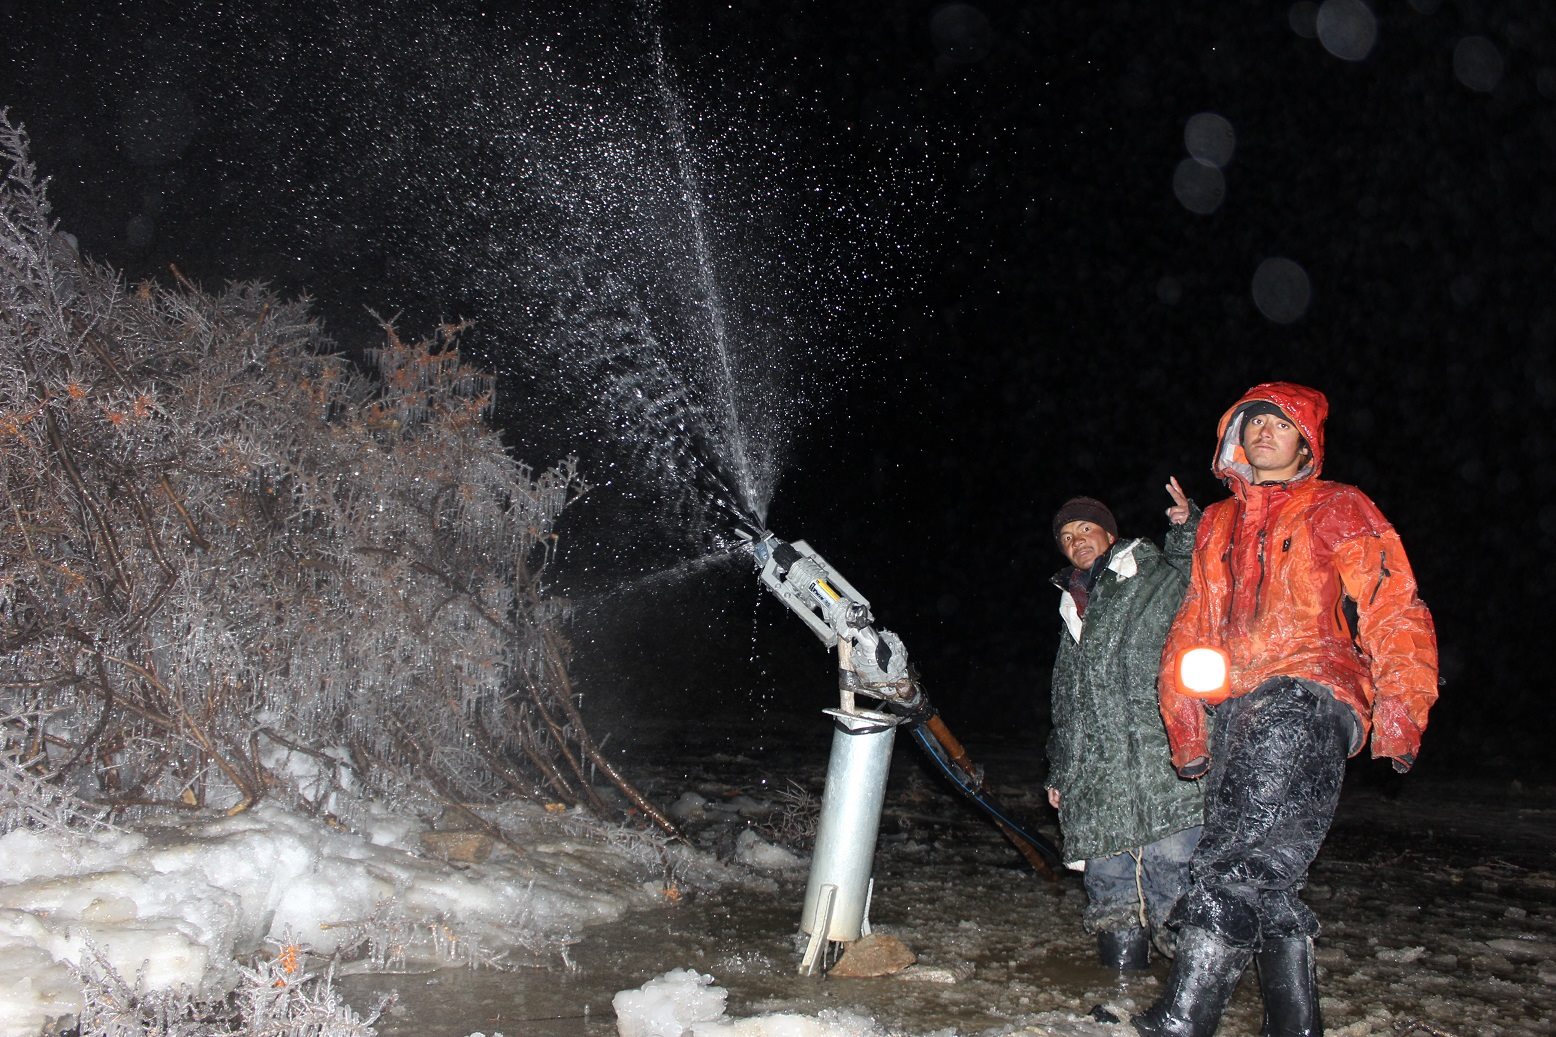 At minus 20 degree Celsius, the sprinkler froze & failed (Source: The Ice Stupa project)